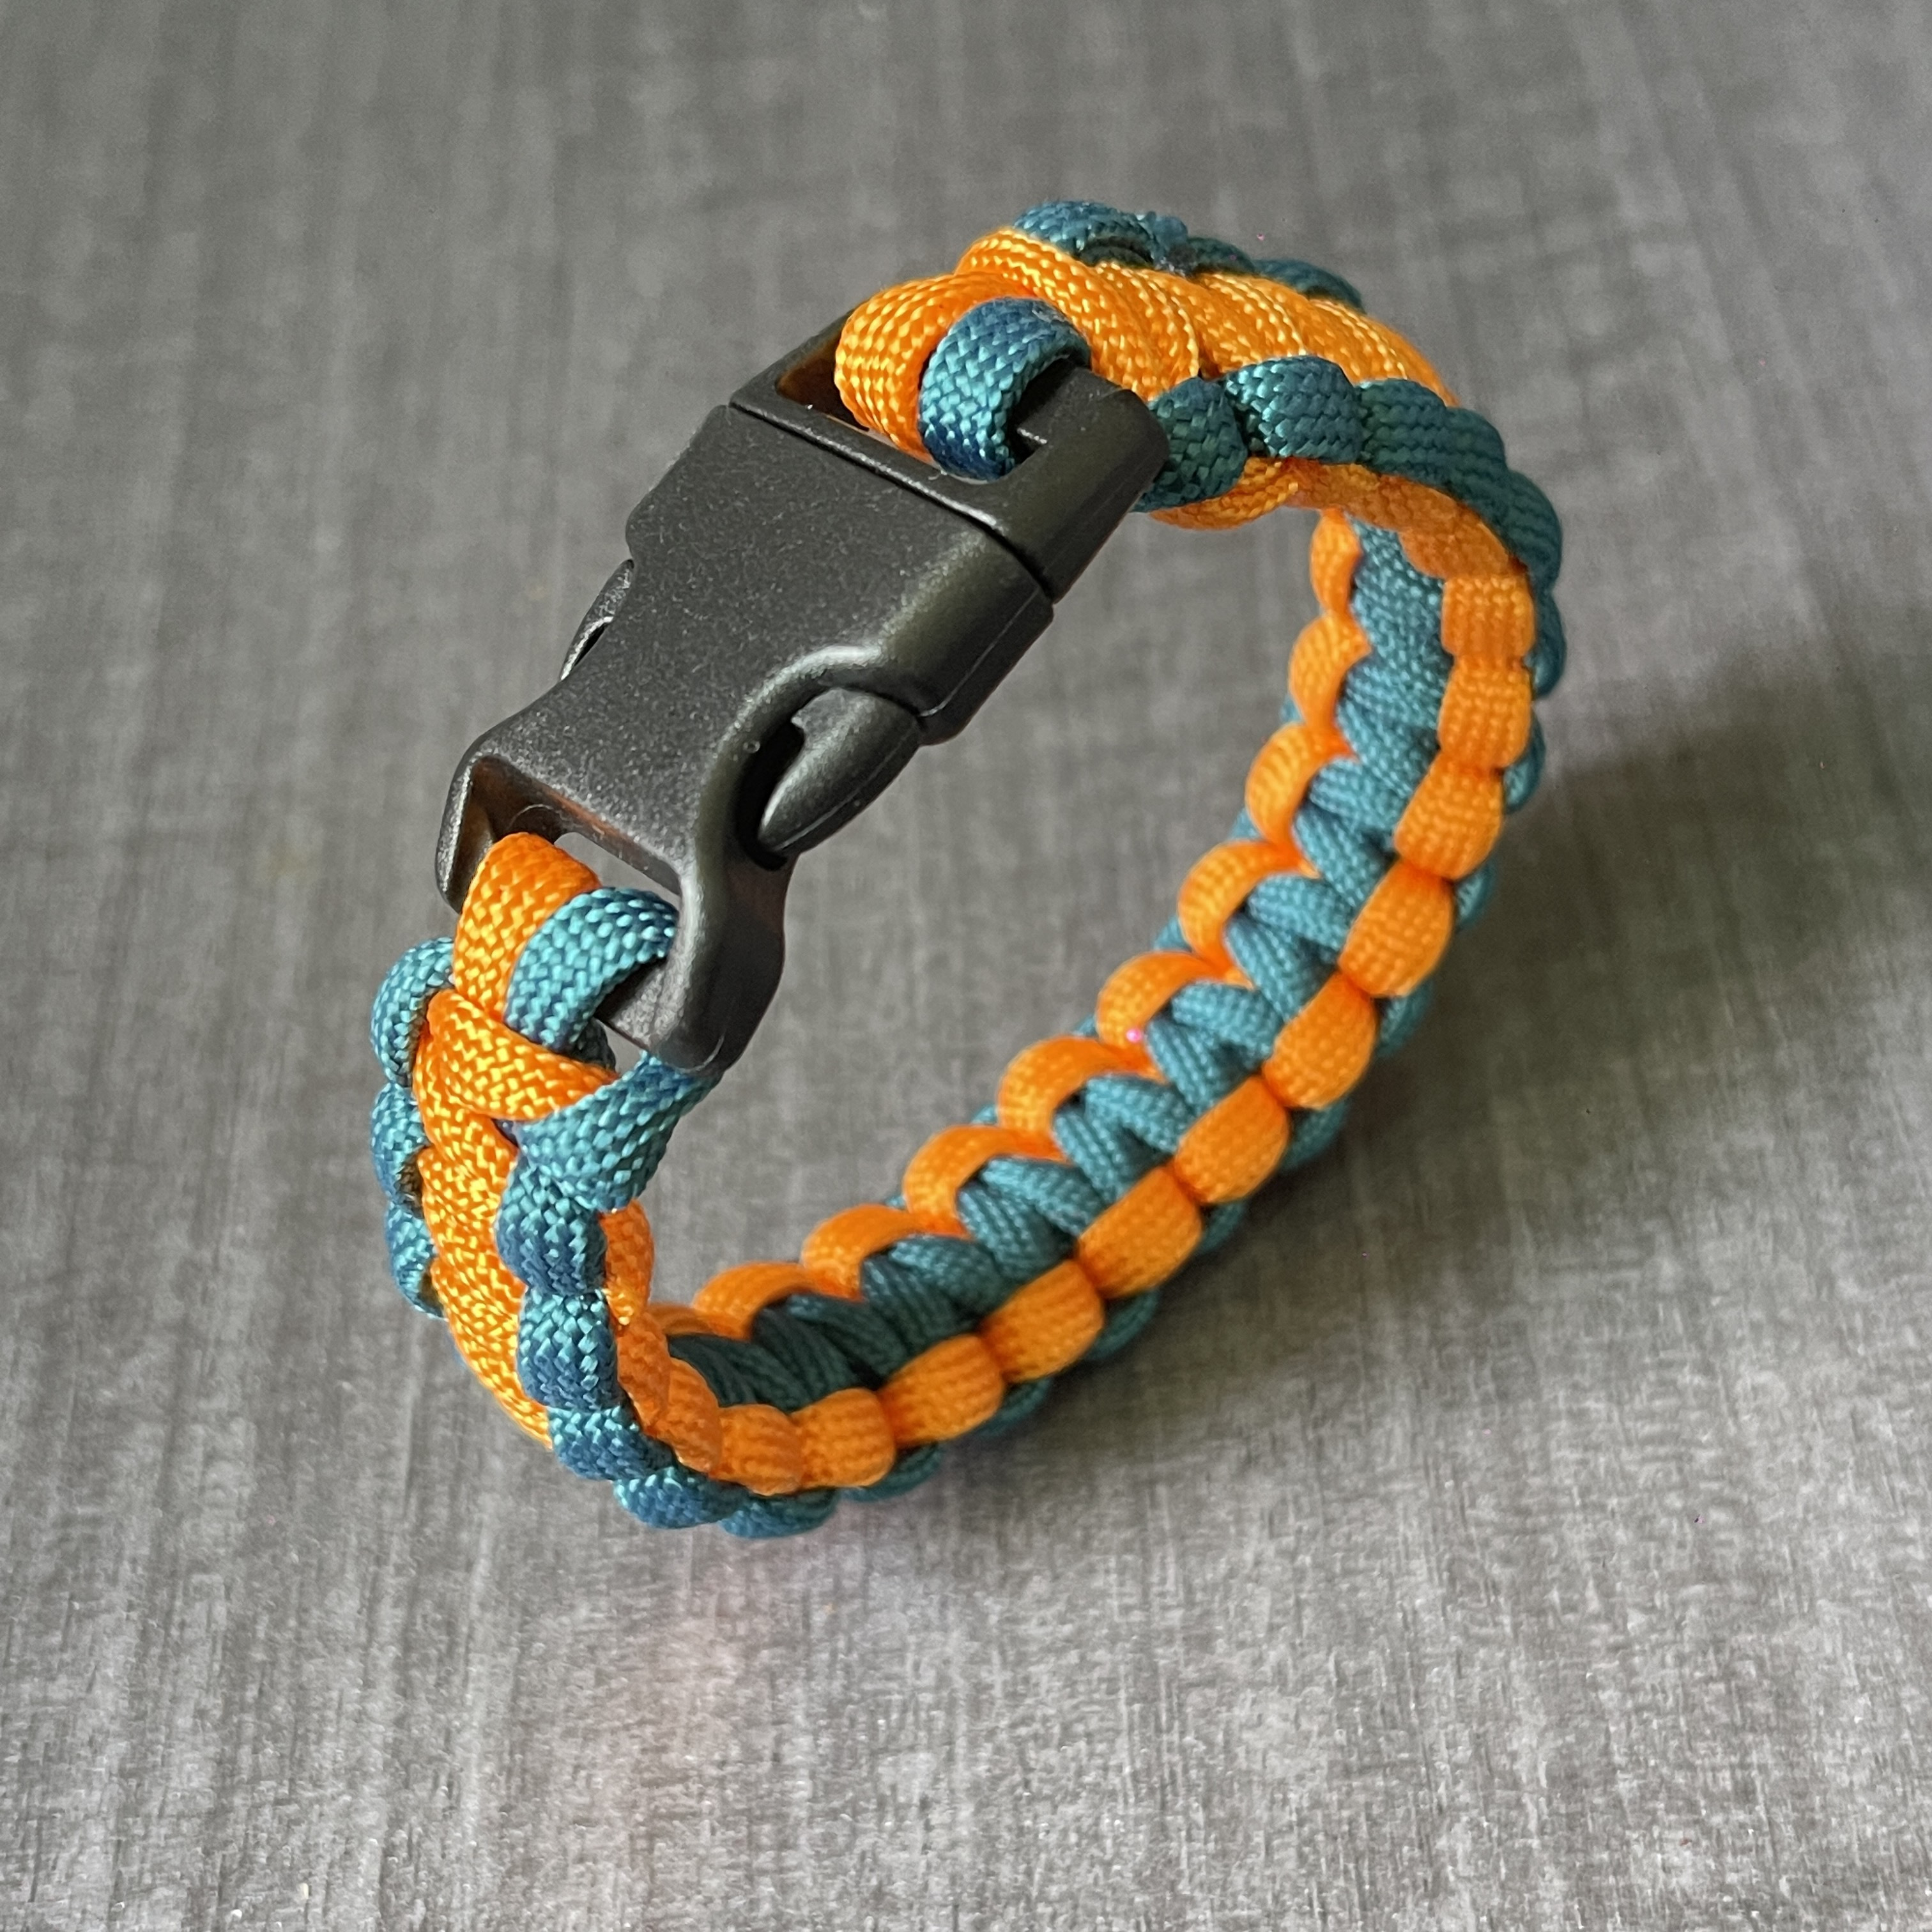 OD Green, Tarheel Blue, and Orange Paracord Bracelet That Will Help People  Who Need It The Most